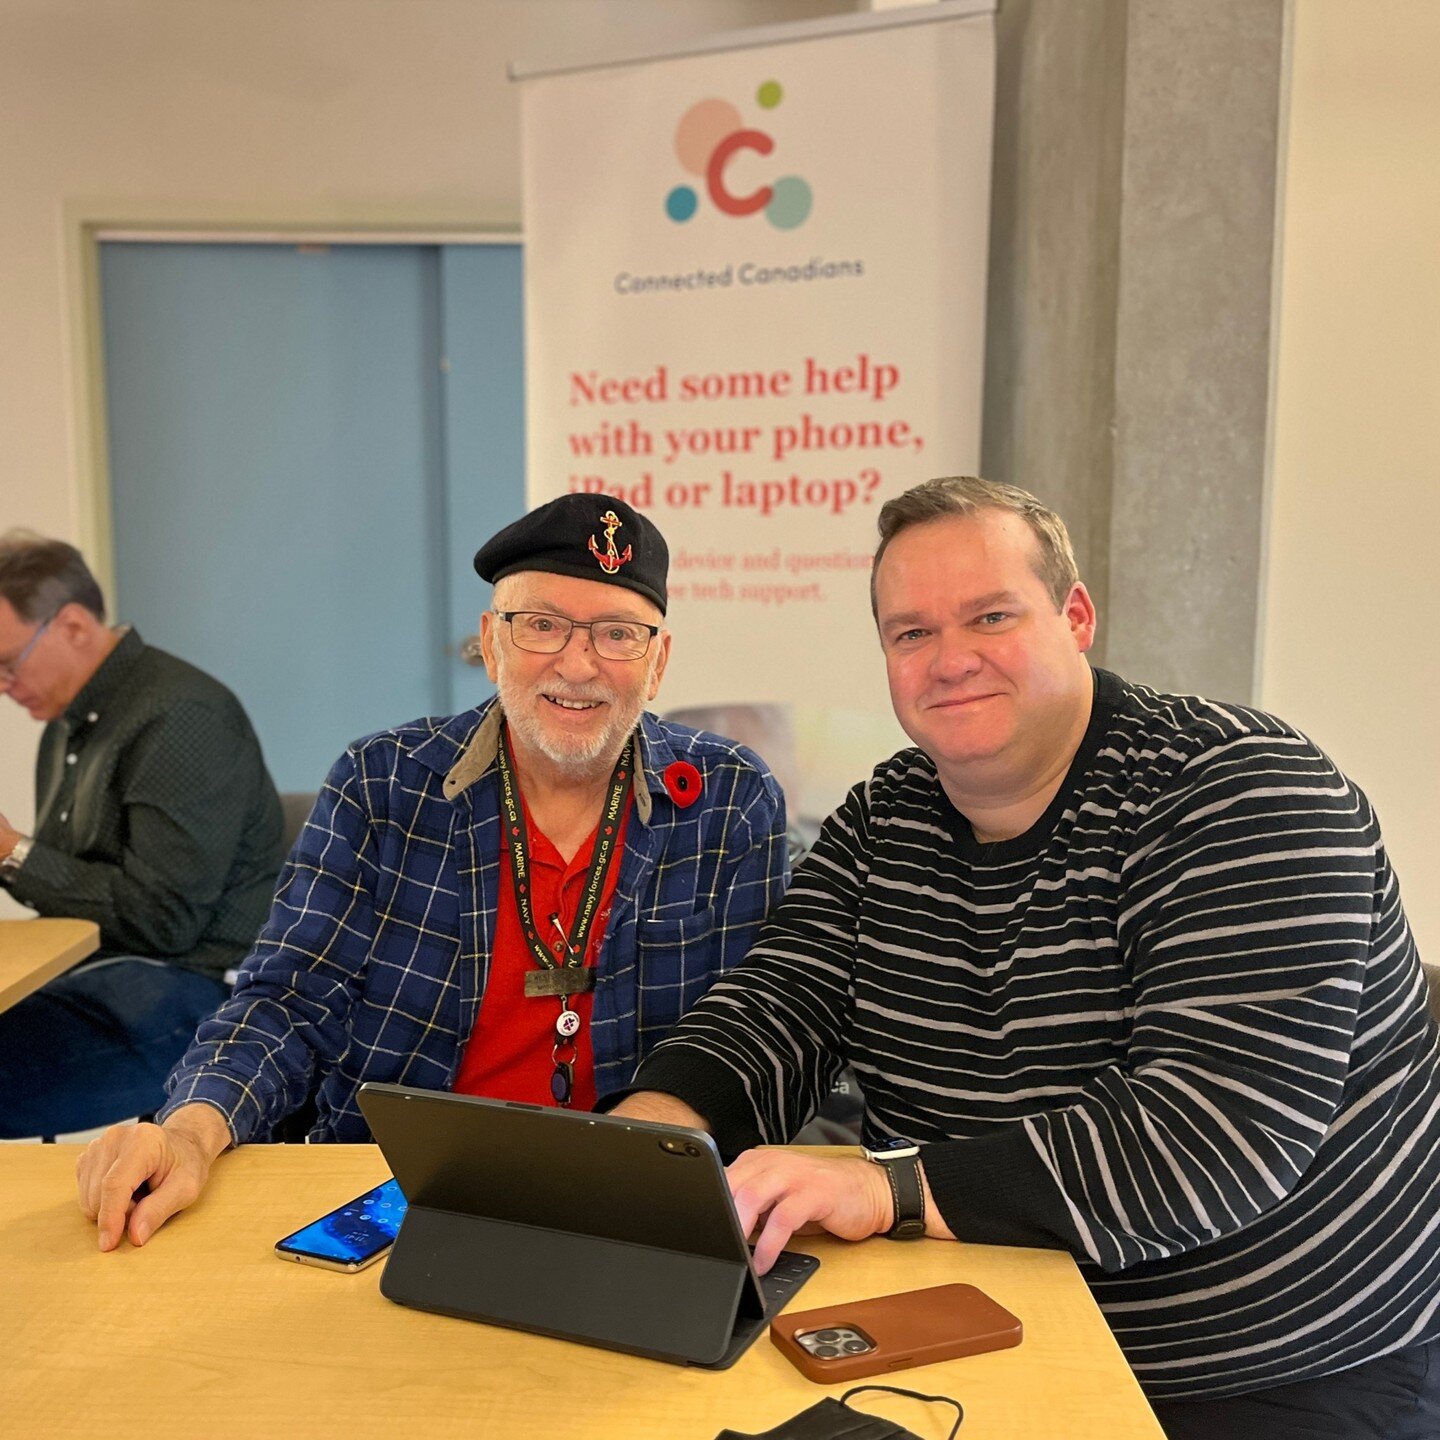 🌟 Celebrating the power of corporate volunteerism! 🤝 The incredible team at Adobe Canada spent a fulfilling morning at Perley Health, volunteering with Connected Canadians to empower seniors with essential digital literacy skills. Together, we're m